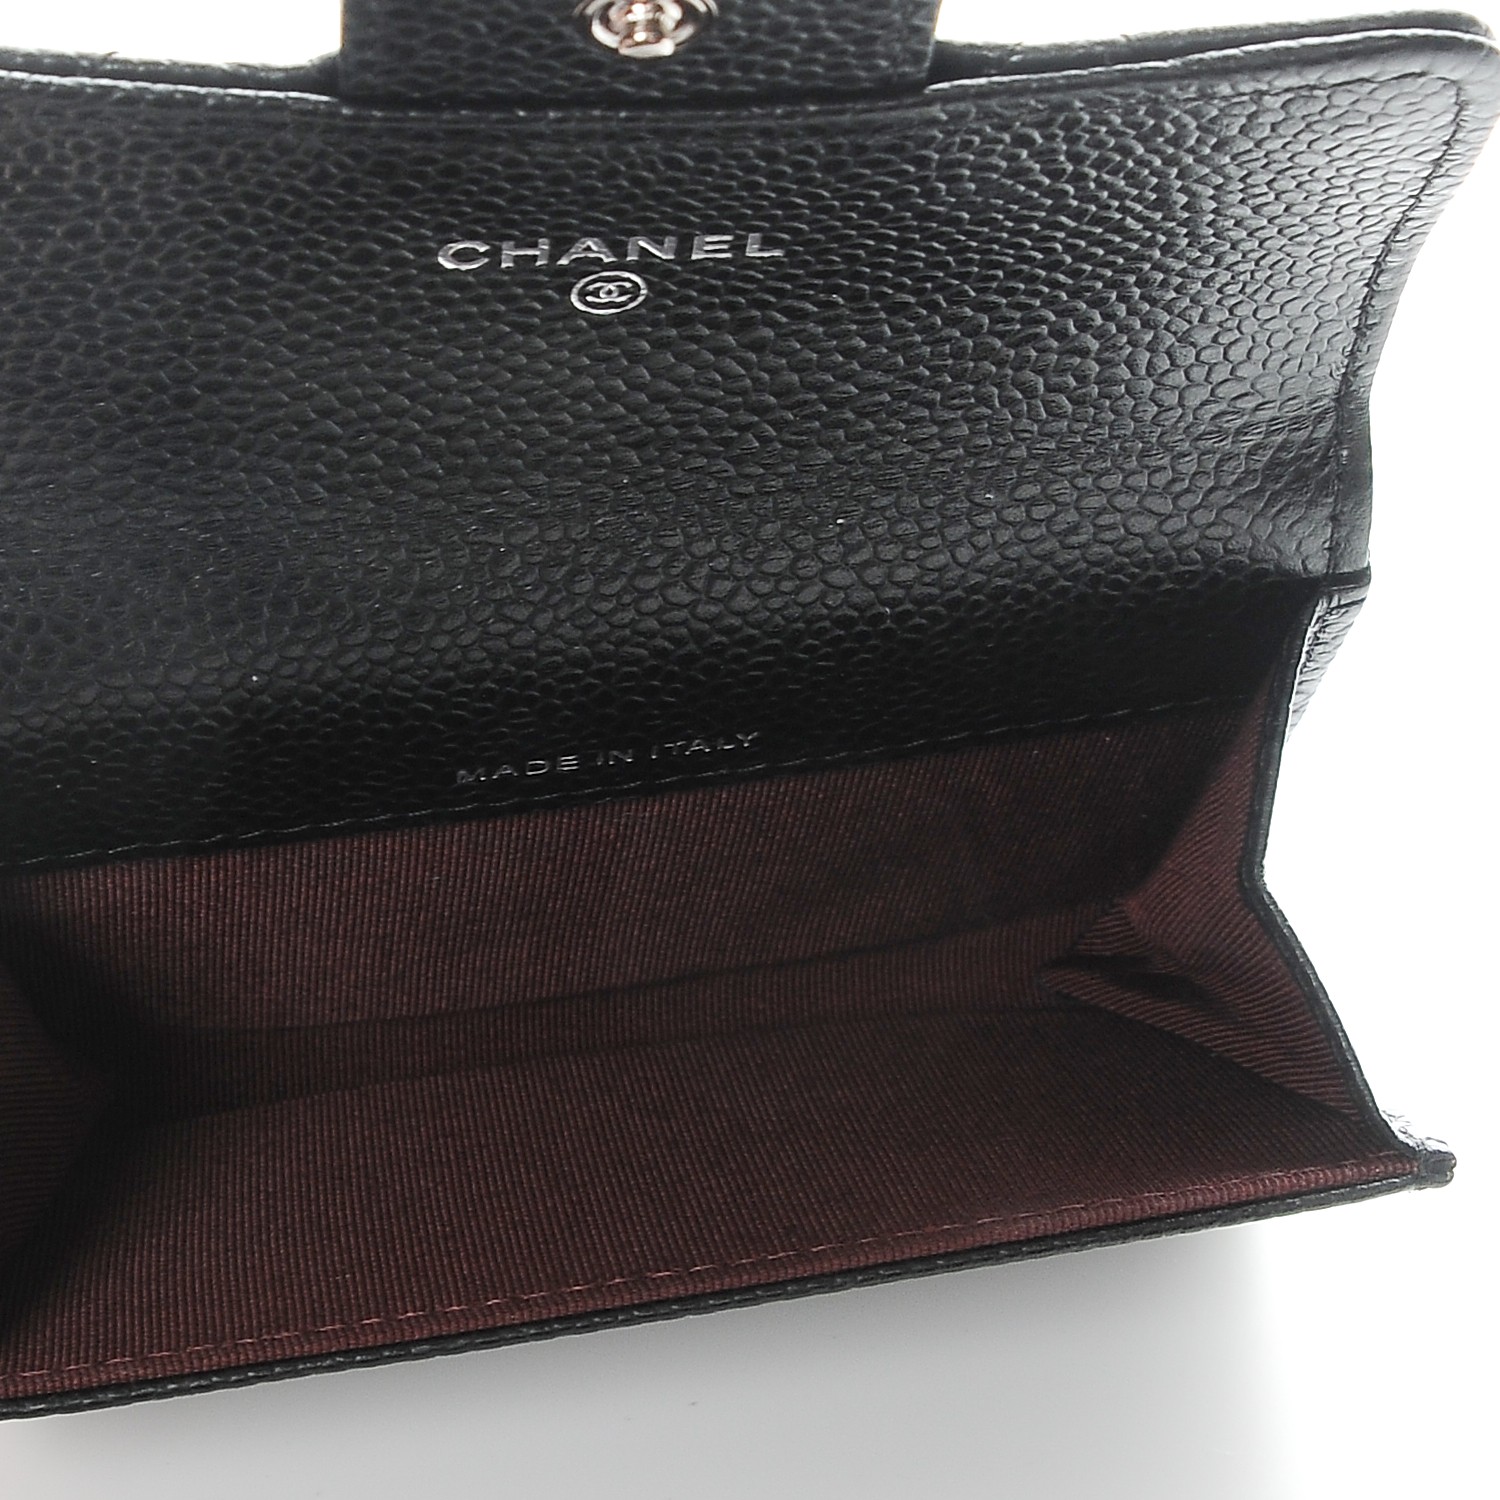 CHANEL Caviar Quilted Coin Purse Black 211889